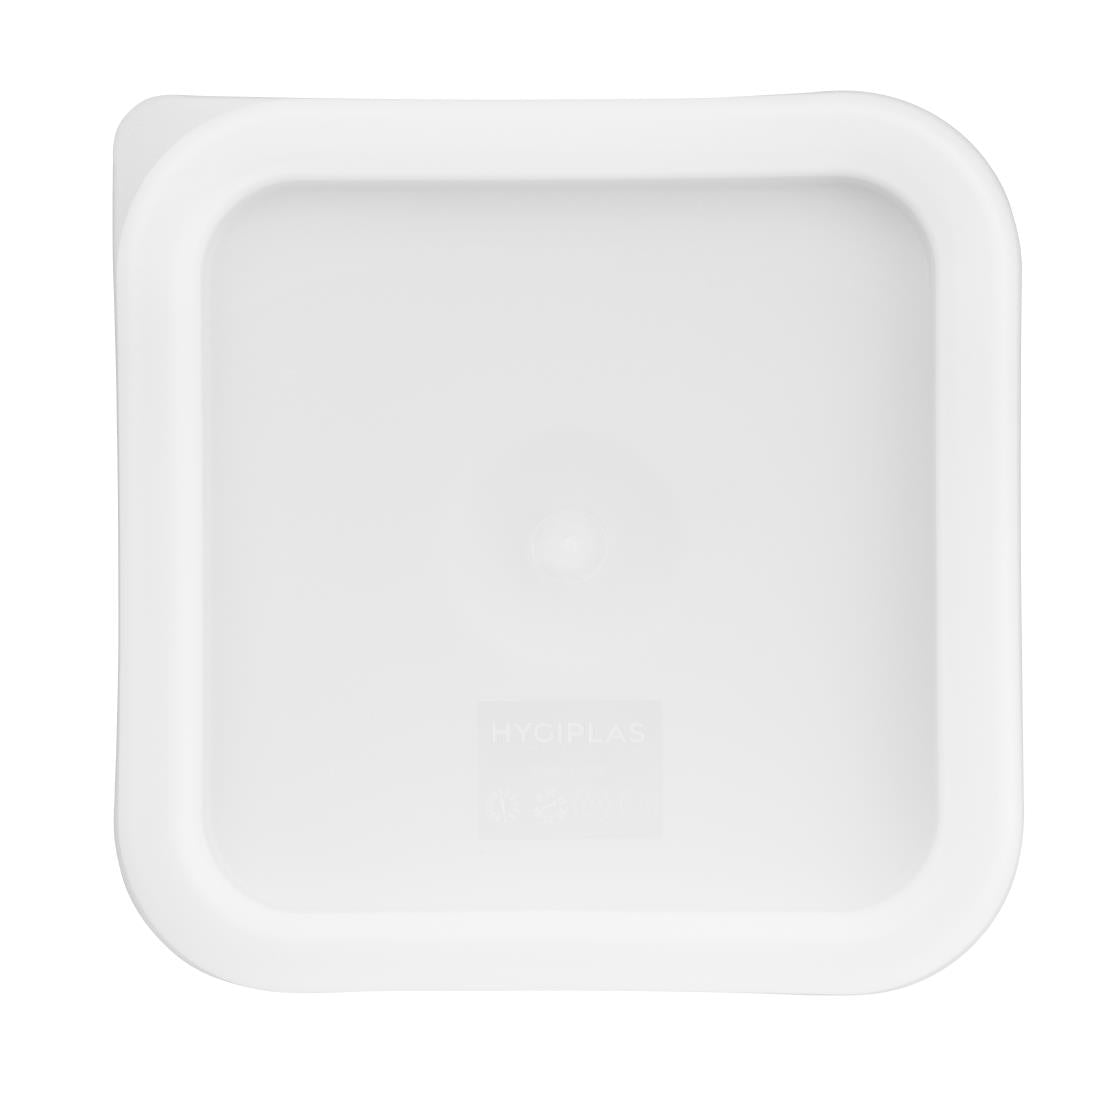 Hygiplas Polycarbonate Square Food Storage Container Lid White Small